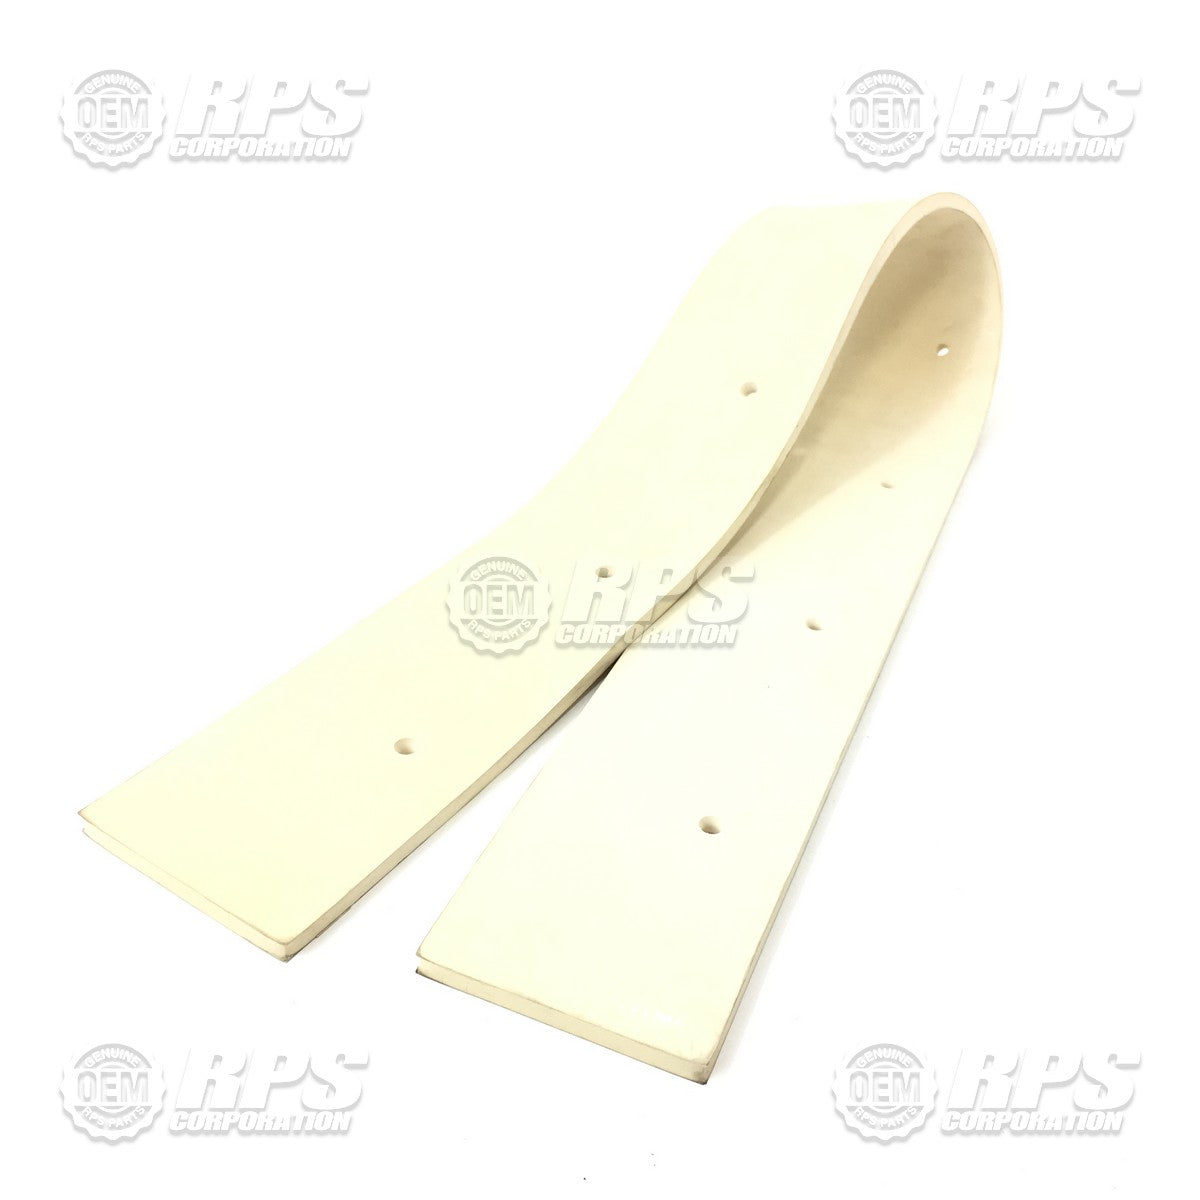 FactoryCat/Tomcat 390-757G, Squeegee Blade Rear, Rough Fits 48"